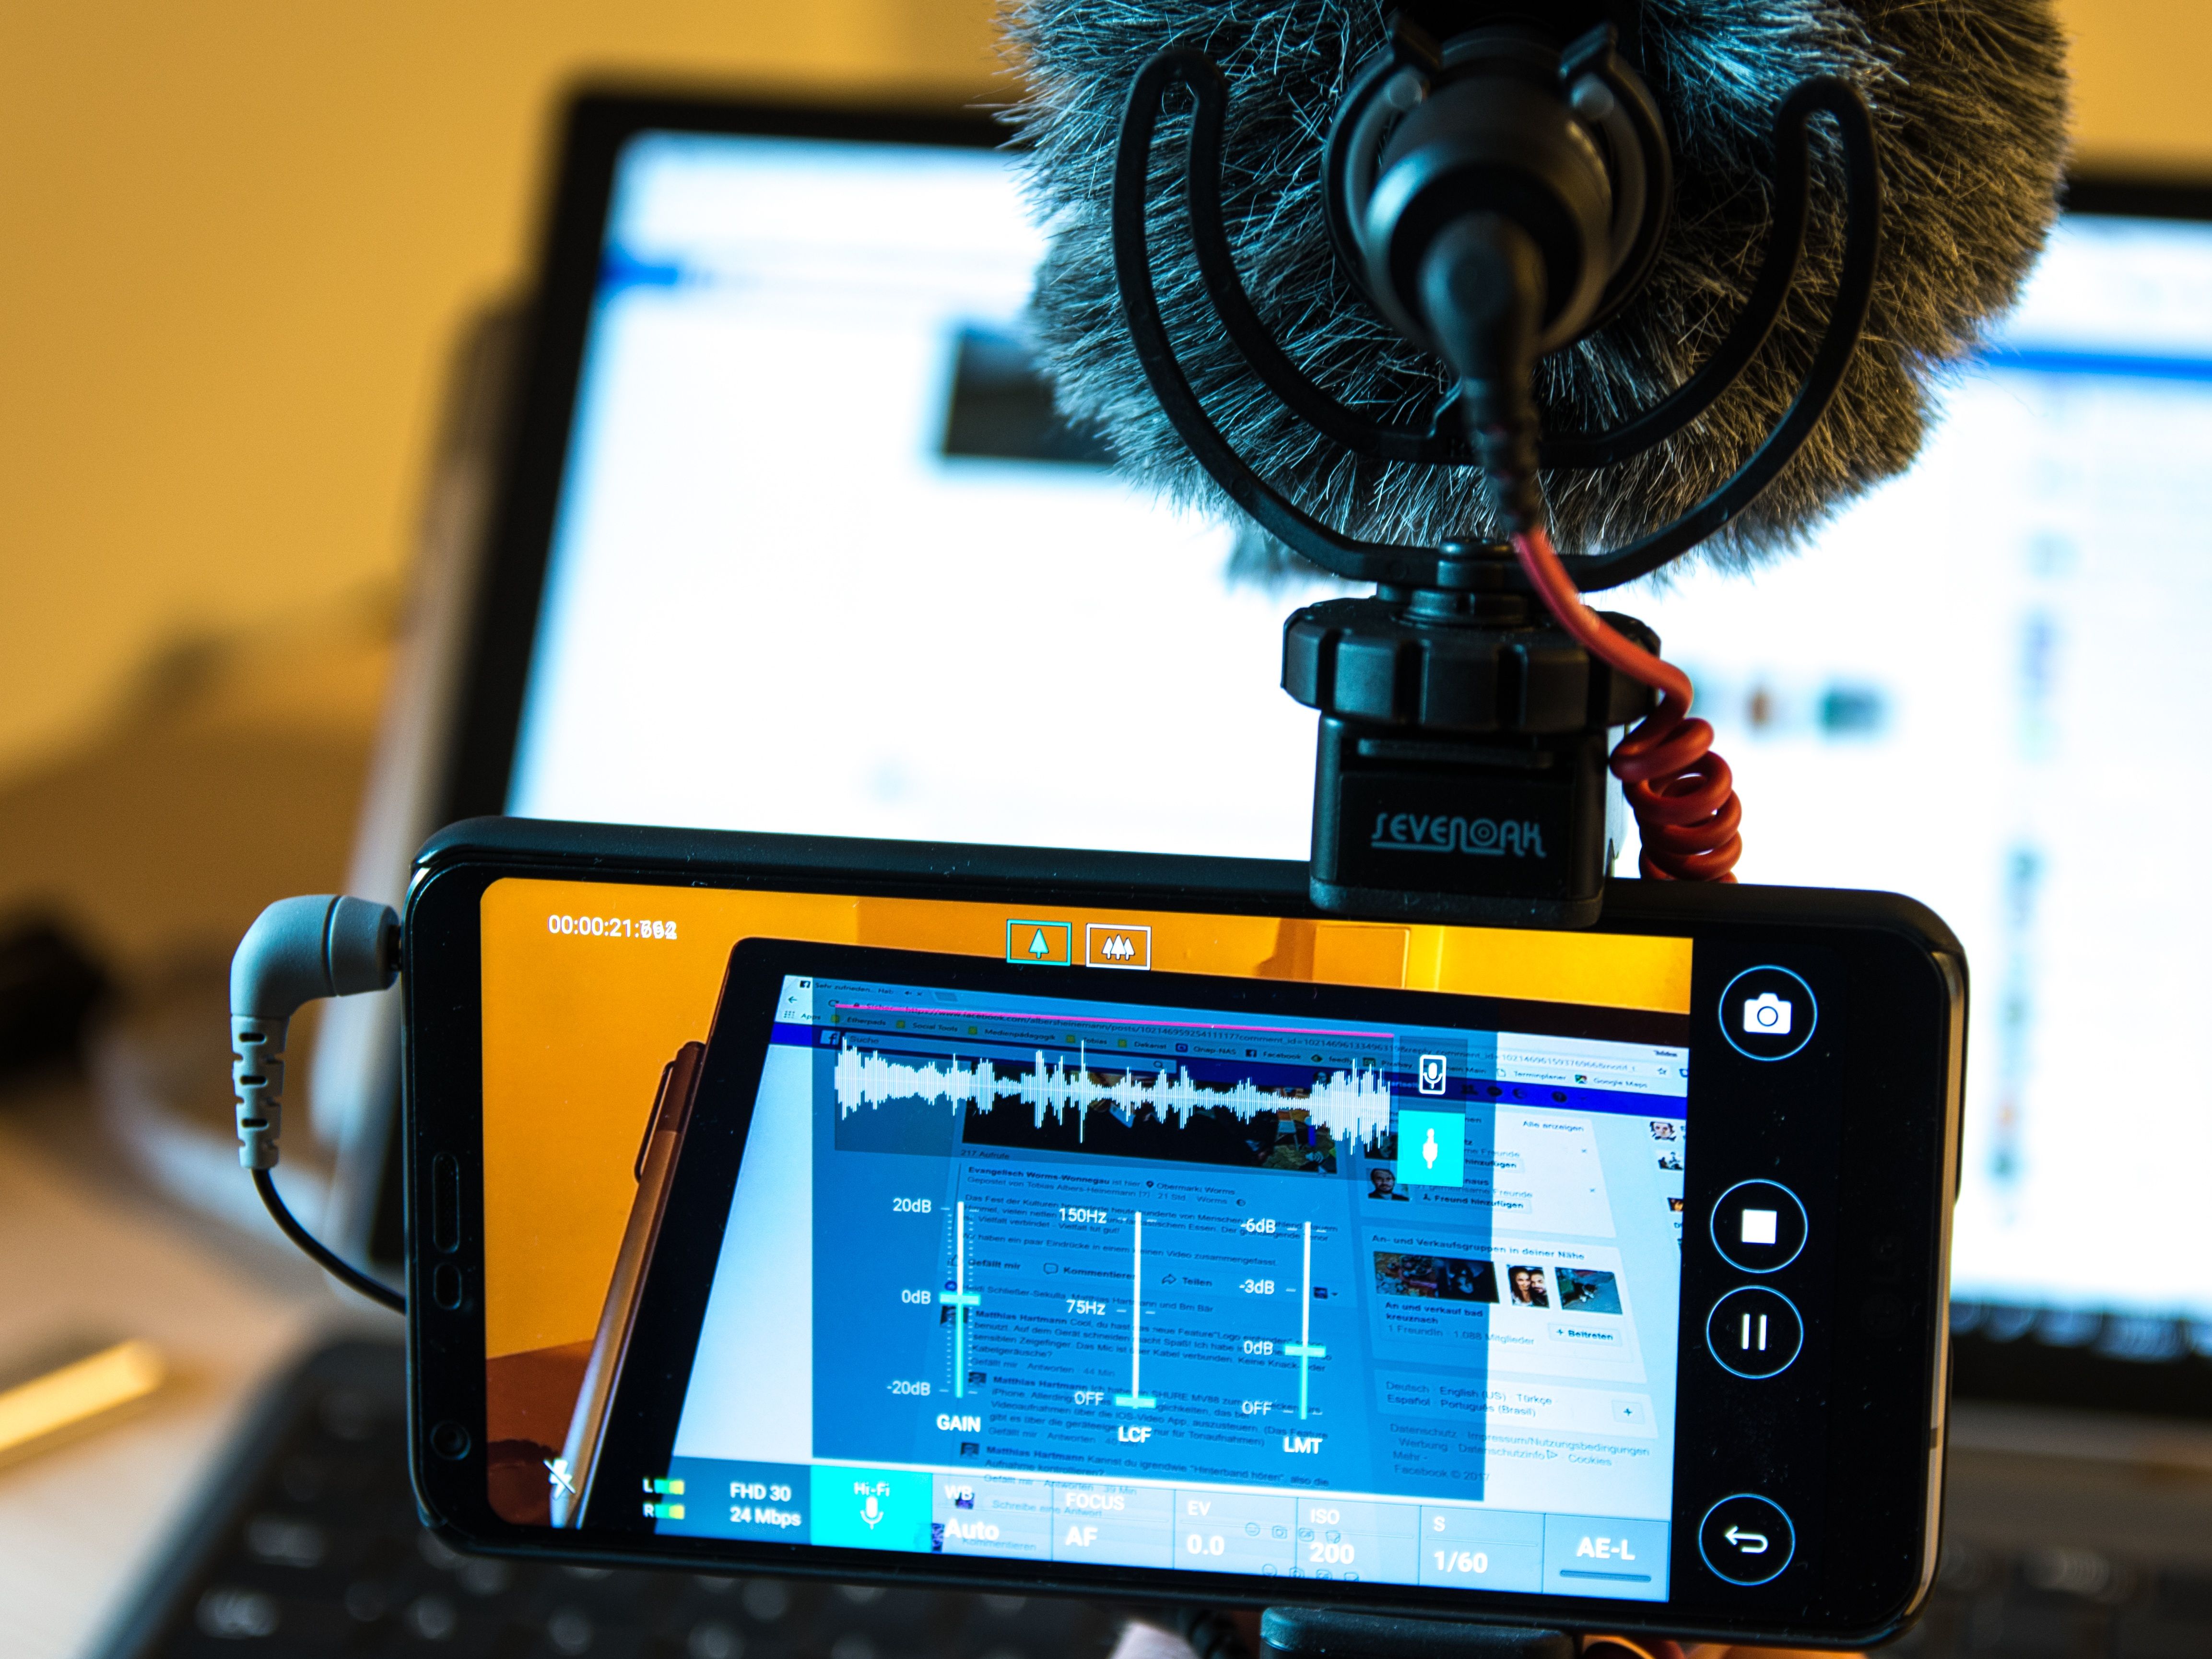 recording sound through a microphone on a smartphone